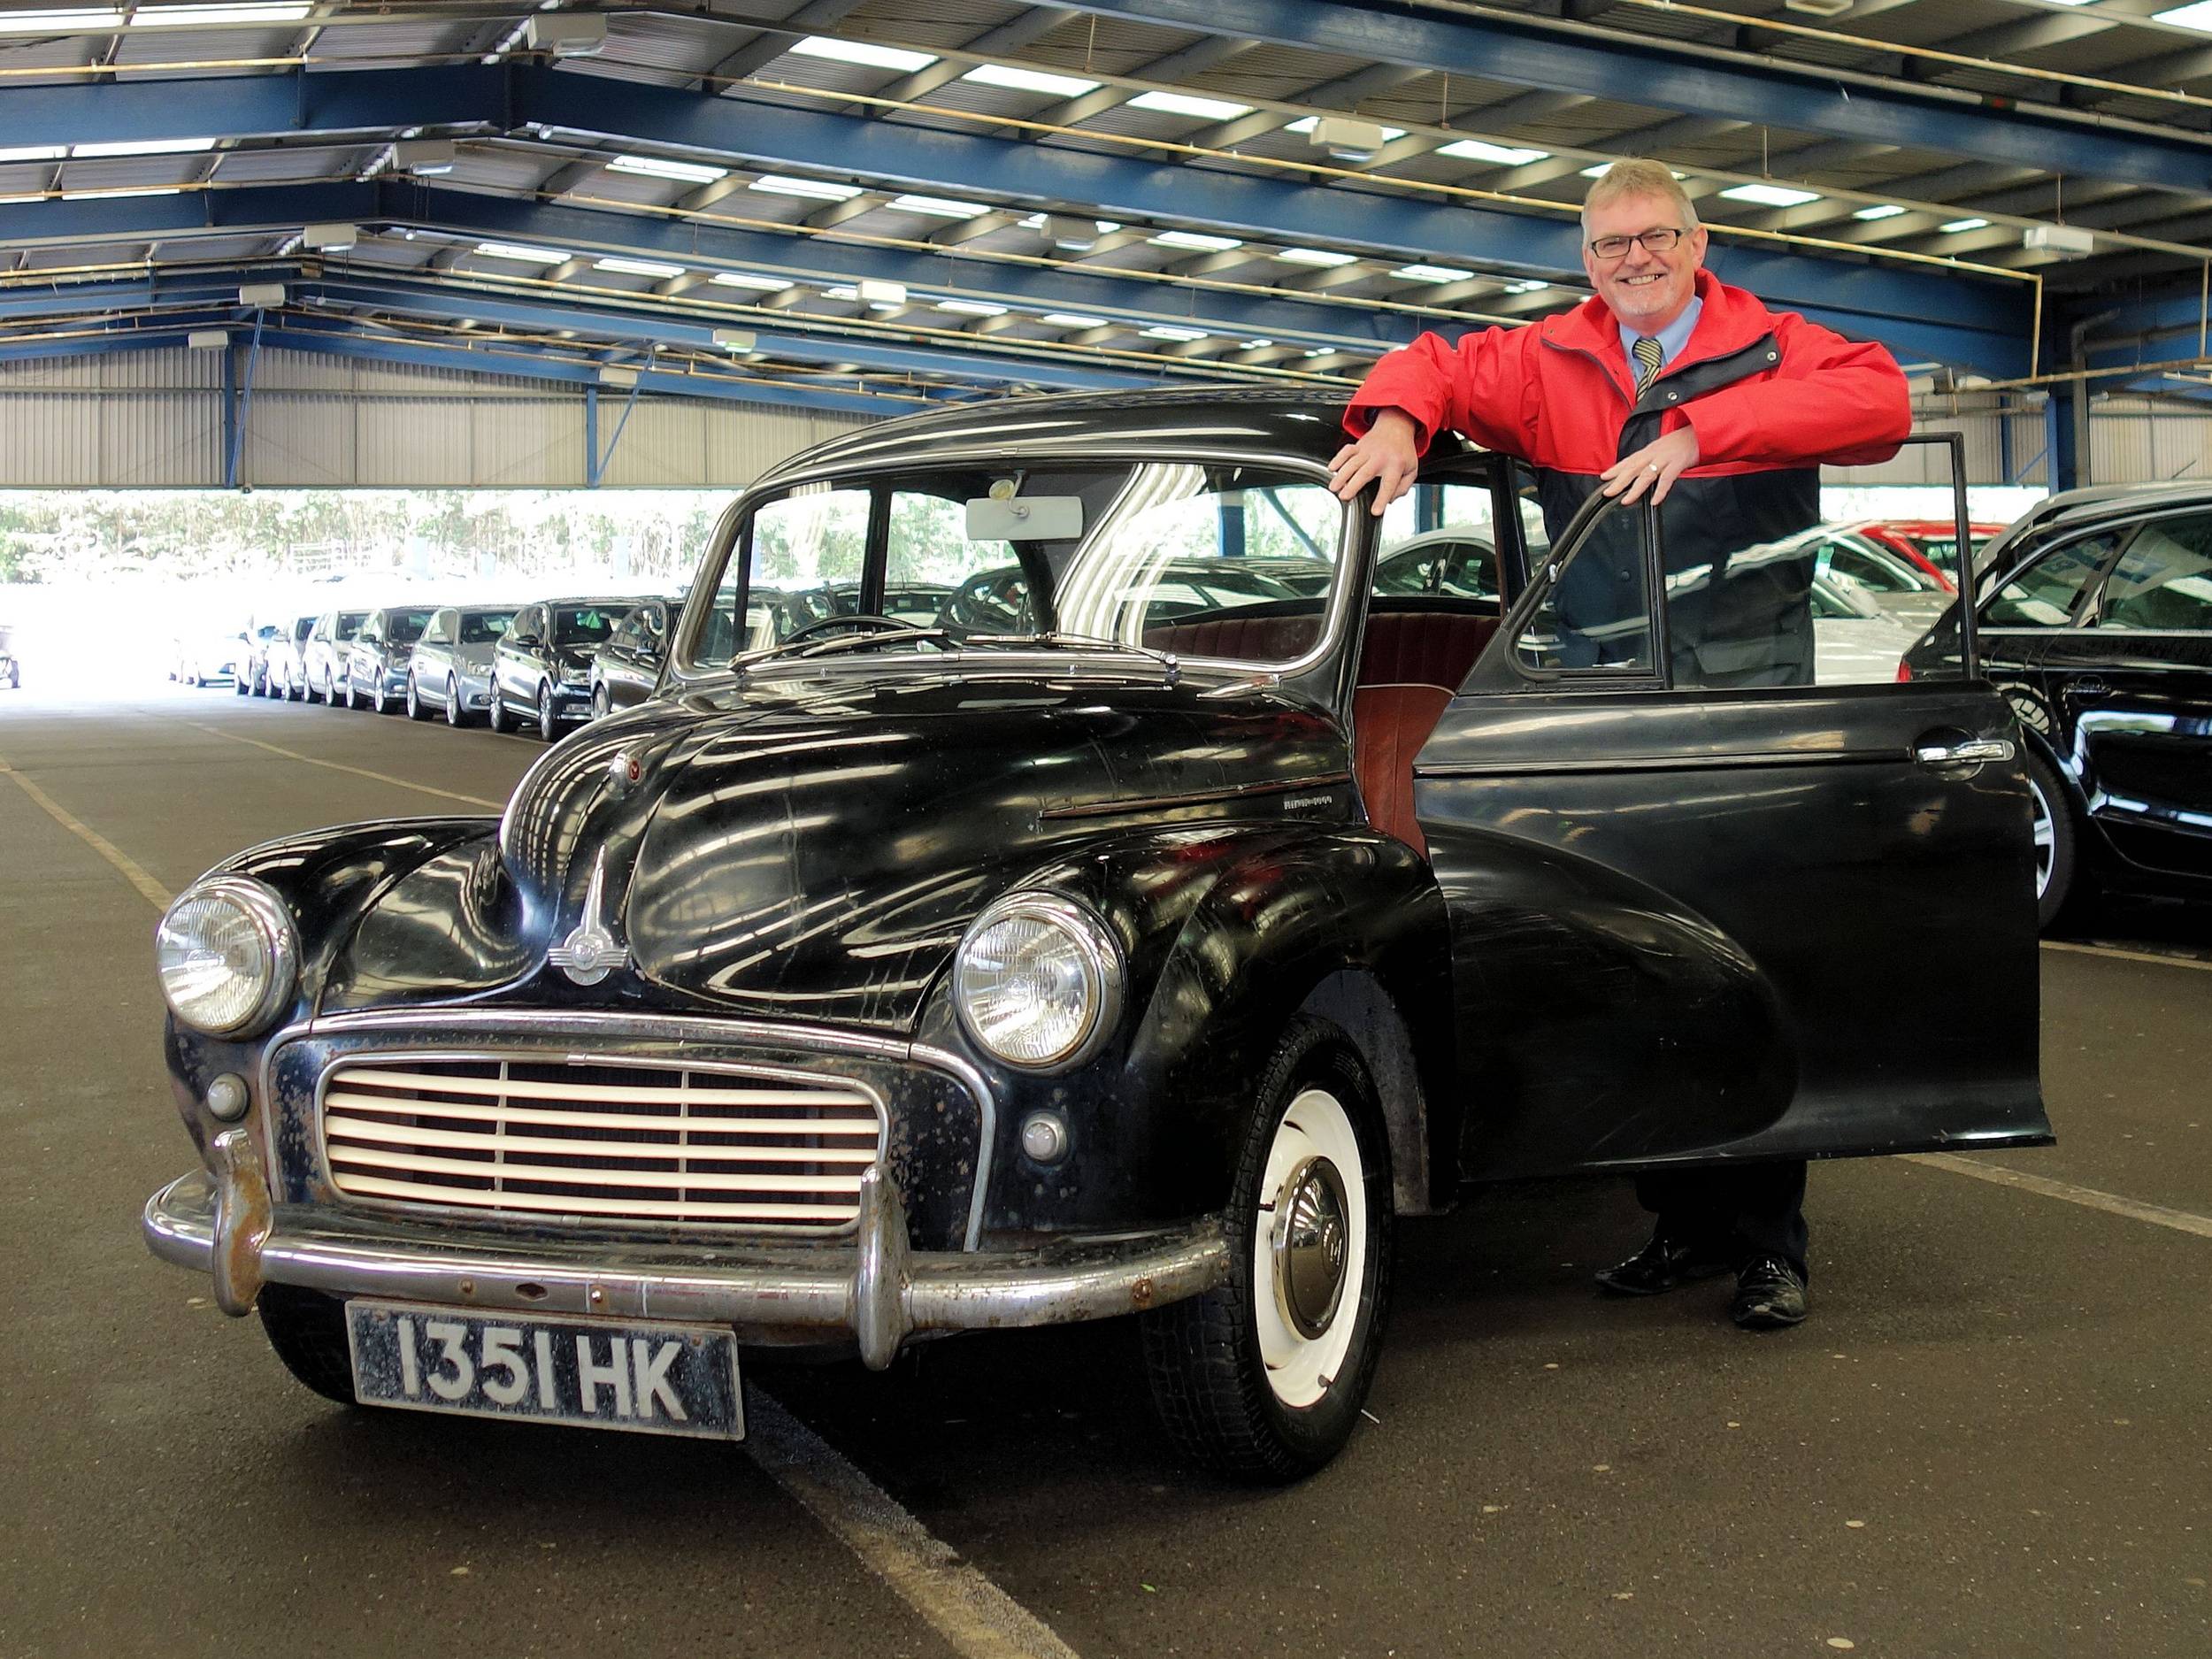 BCA to sell Morris Minor again - after 35 years